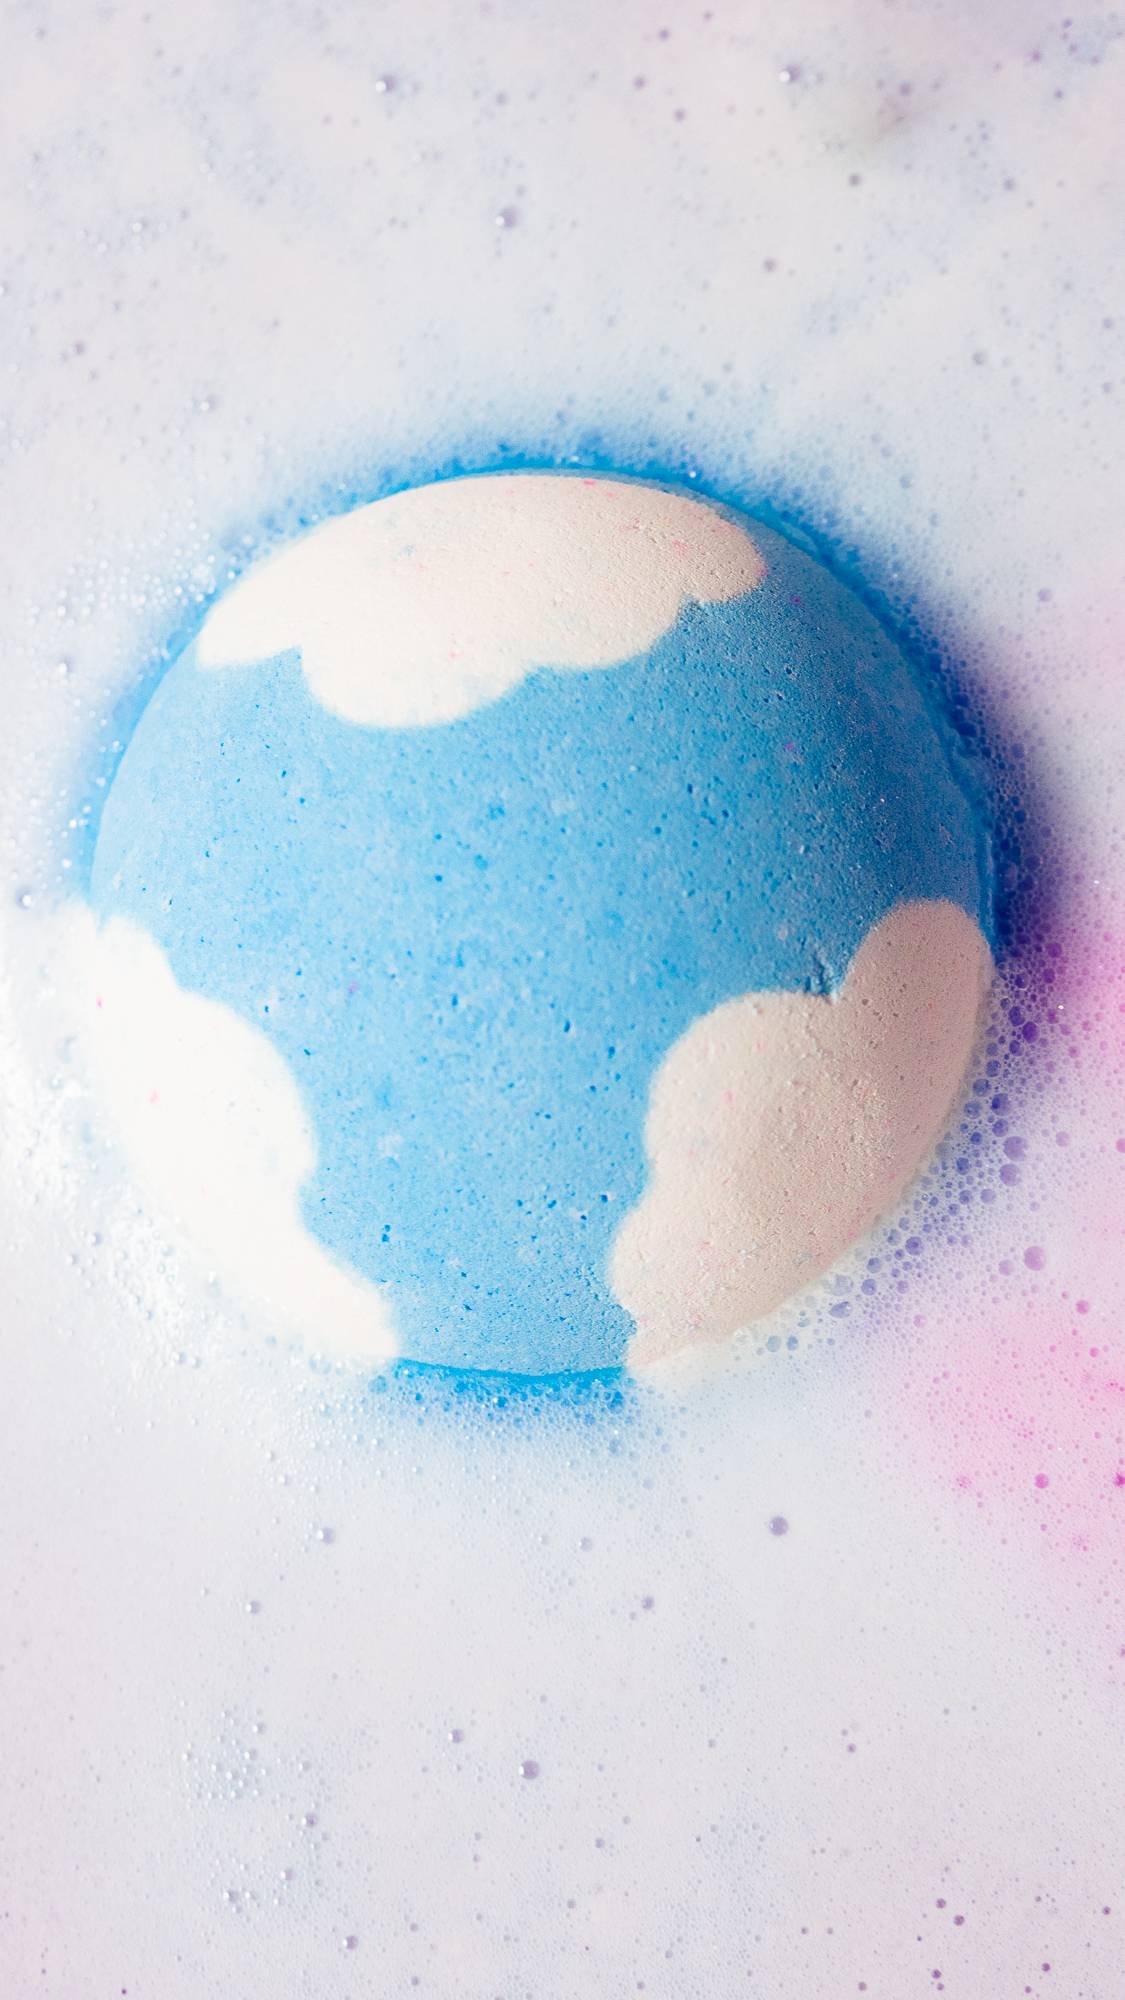 The Atom Heart Mother bath bomb sits in the water slowly dissolving, giving off thick foam and hints of pink.